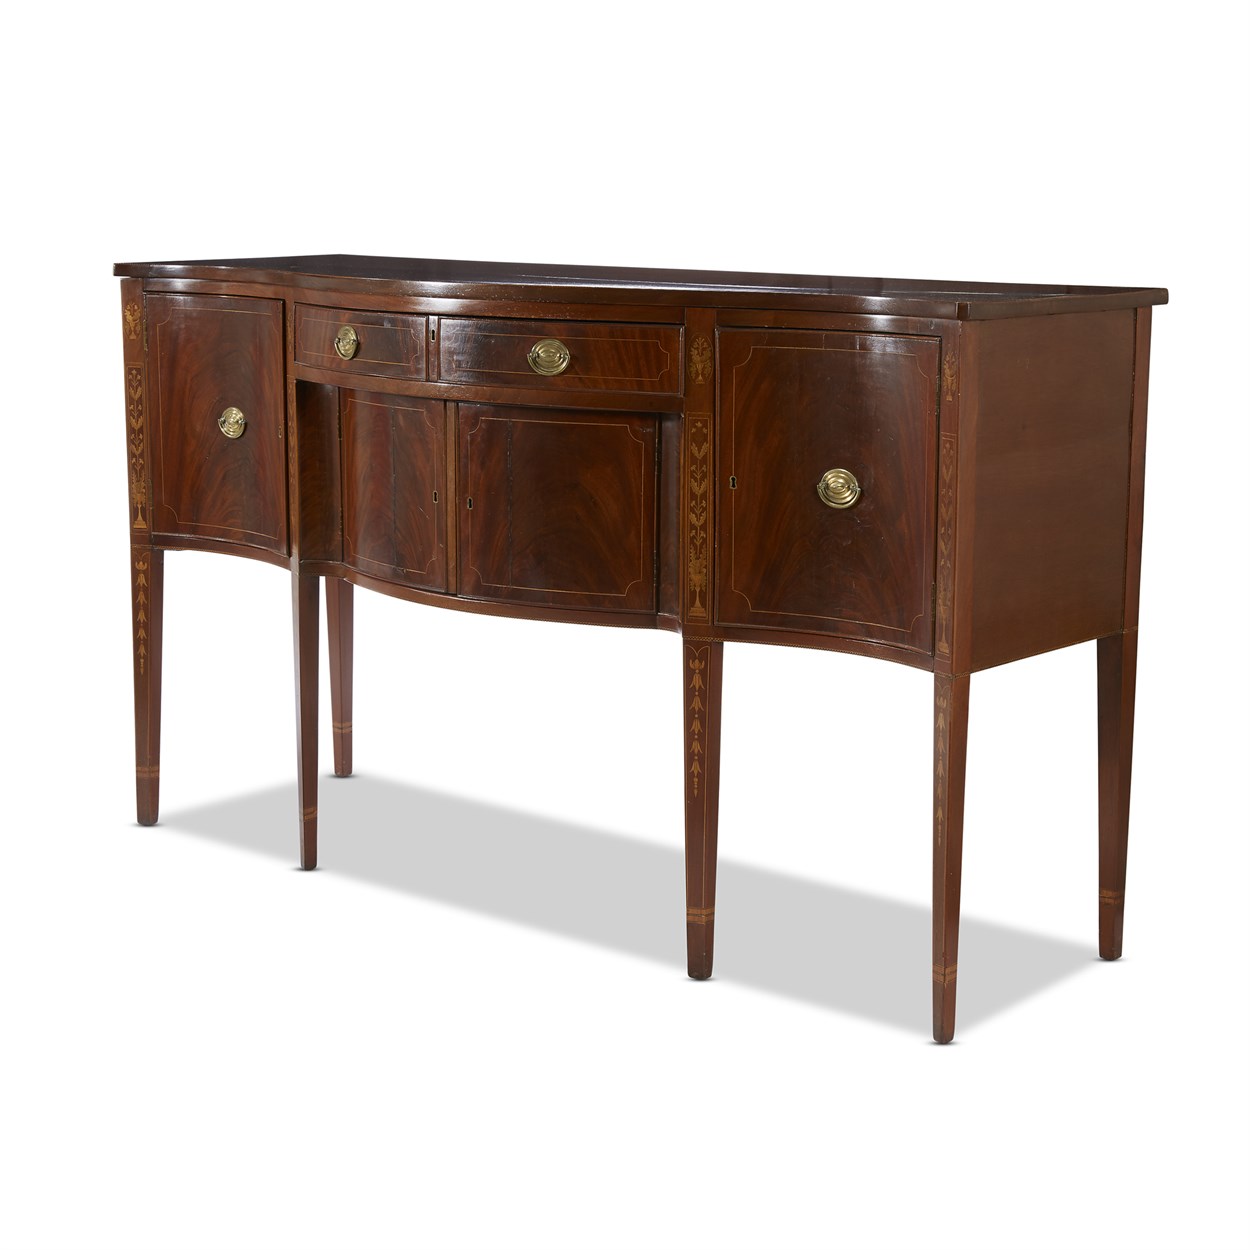 Lot 97 - A George III style string inlaid mahogany bowfront sideboard